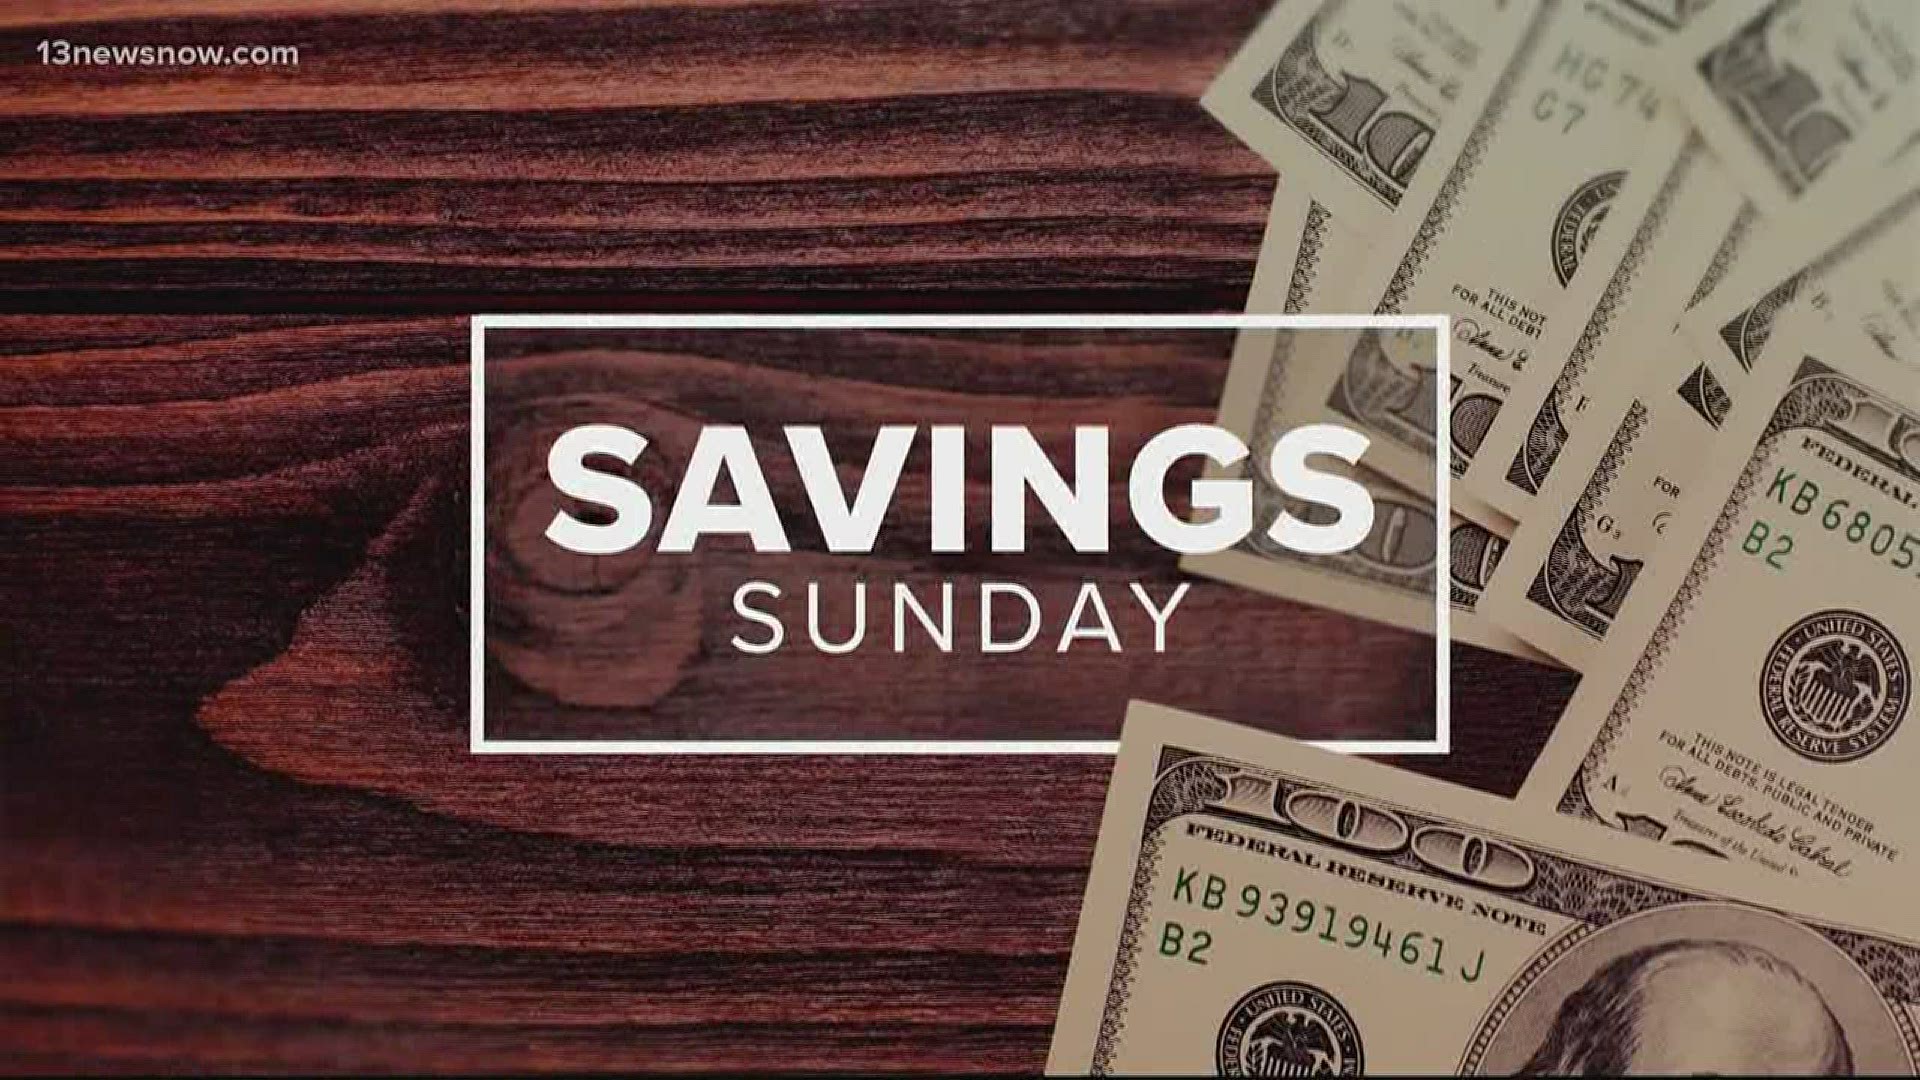 Savings Sunday deals for the week of April 12, 2020